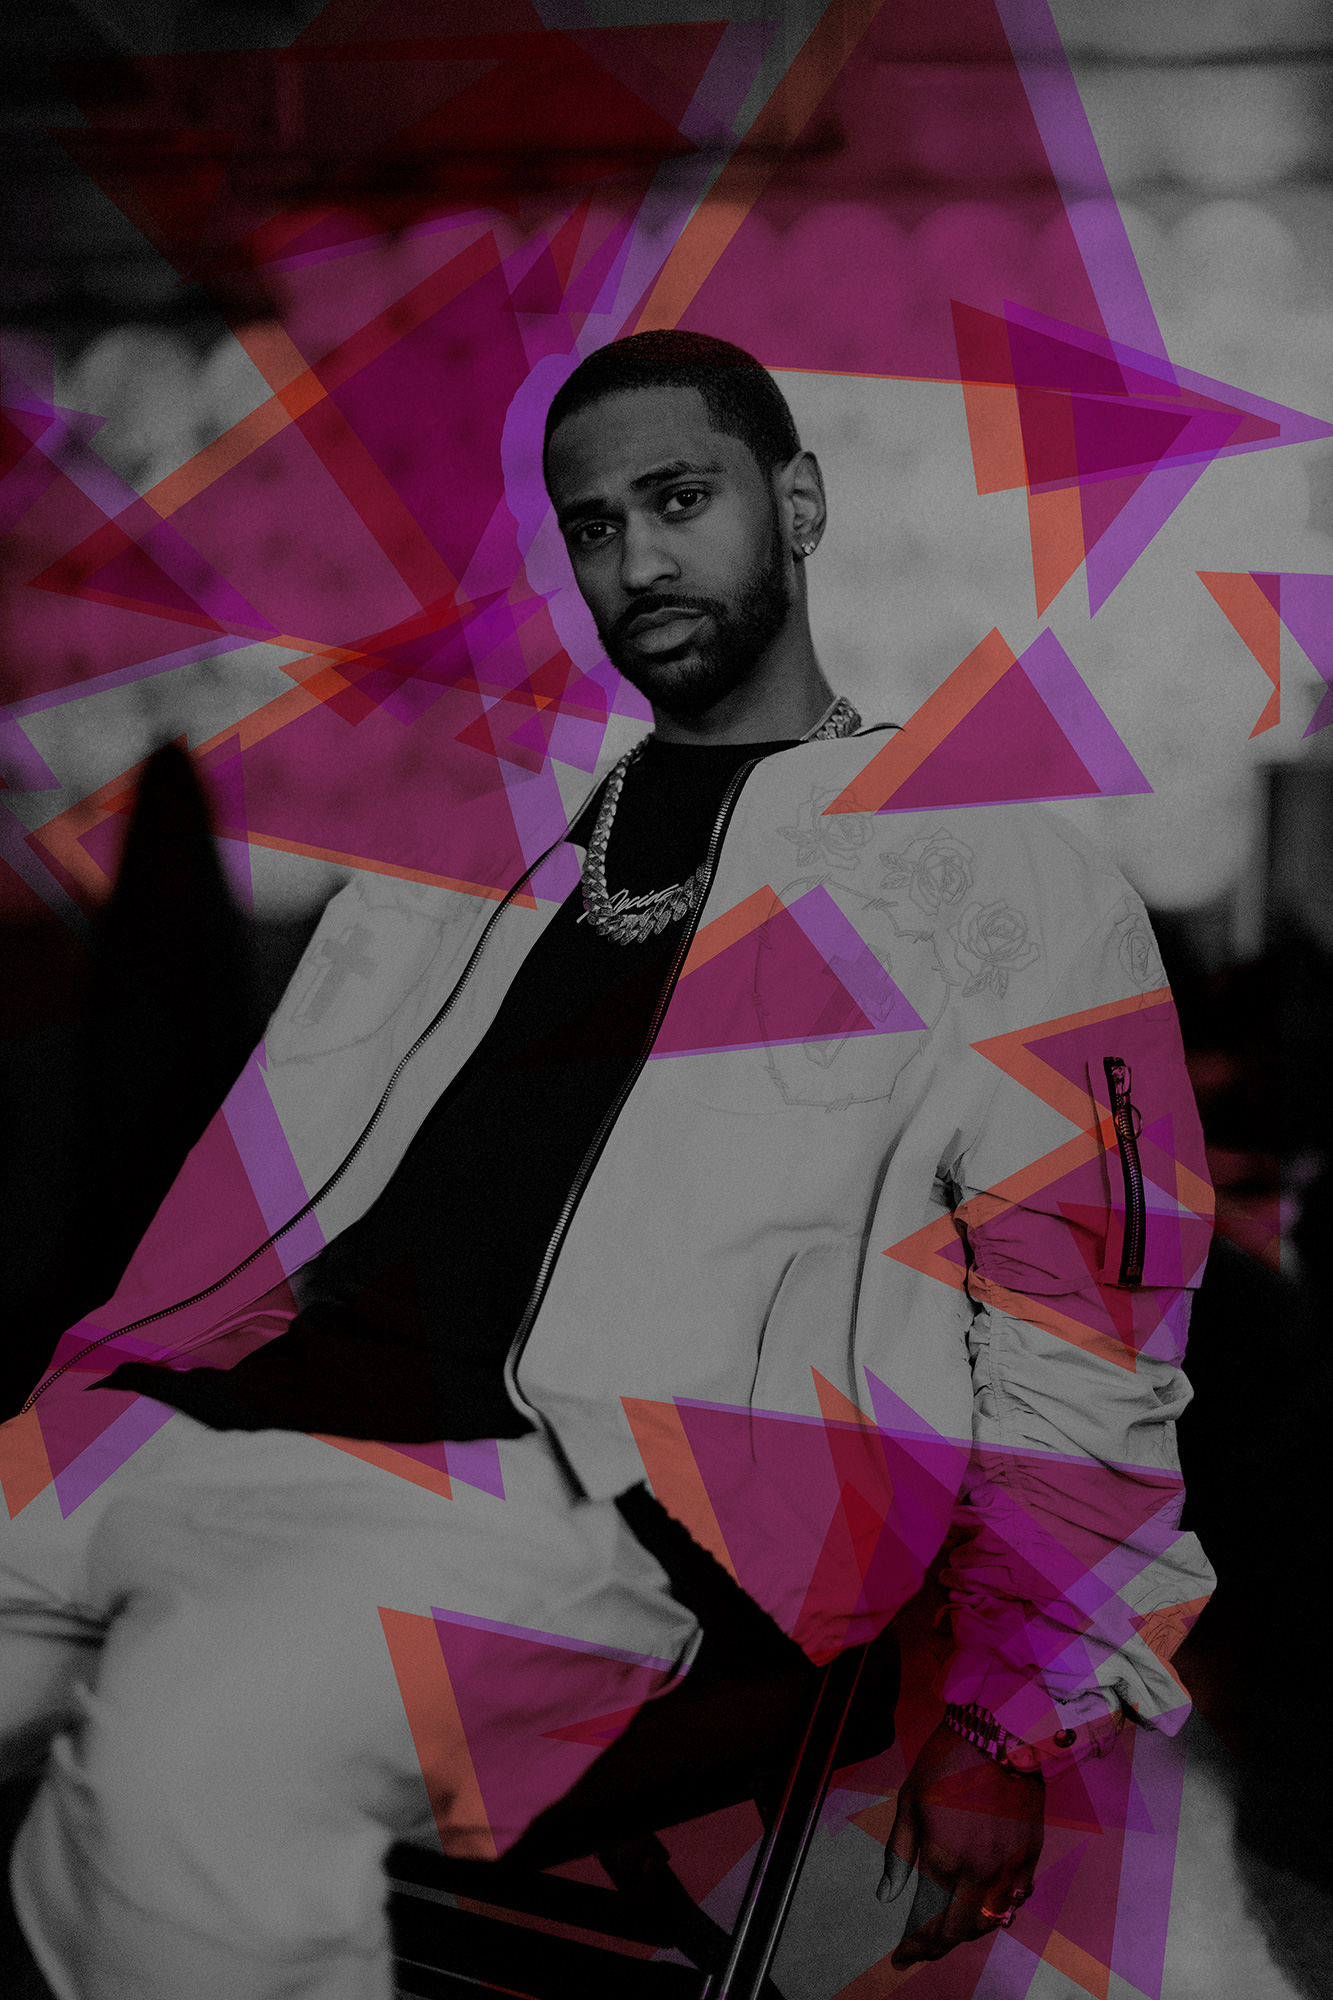 Big Sean, hip hop artist, is photographed backstage at Revention Center in Houston, Texas before the first show of his 